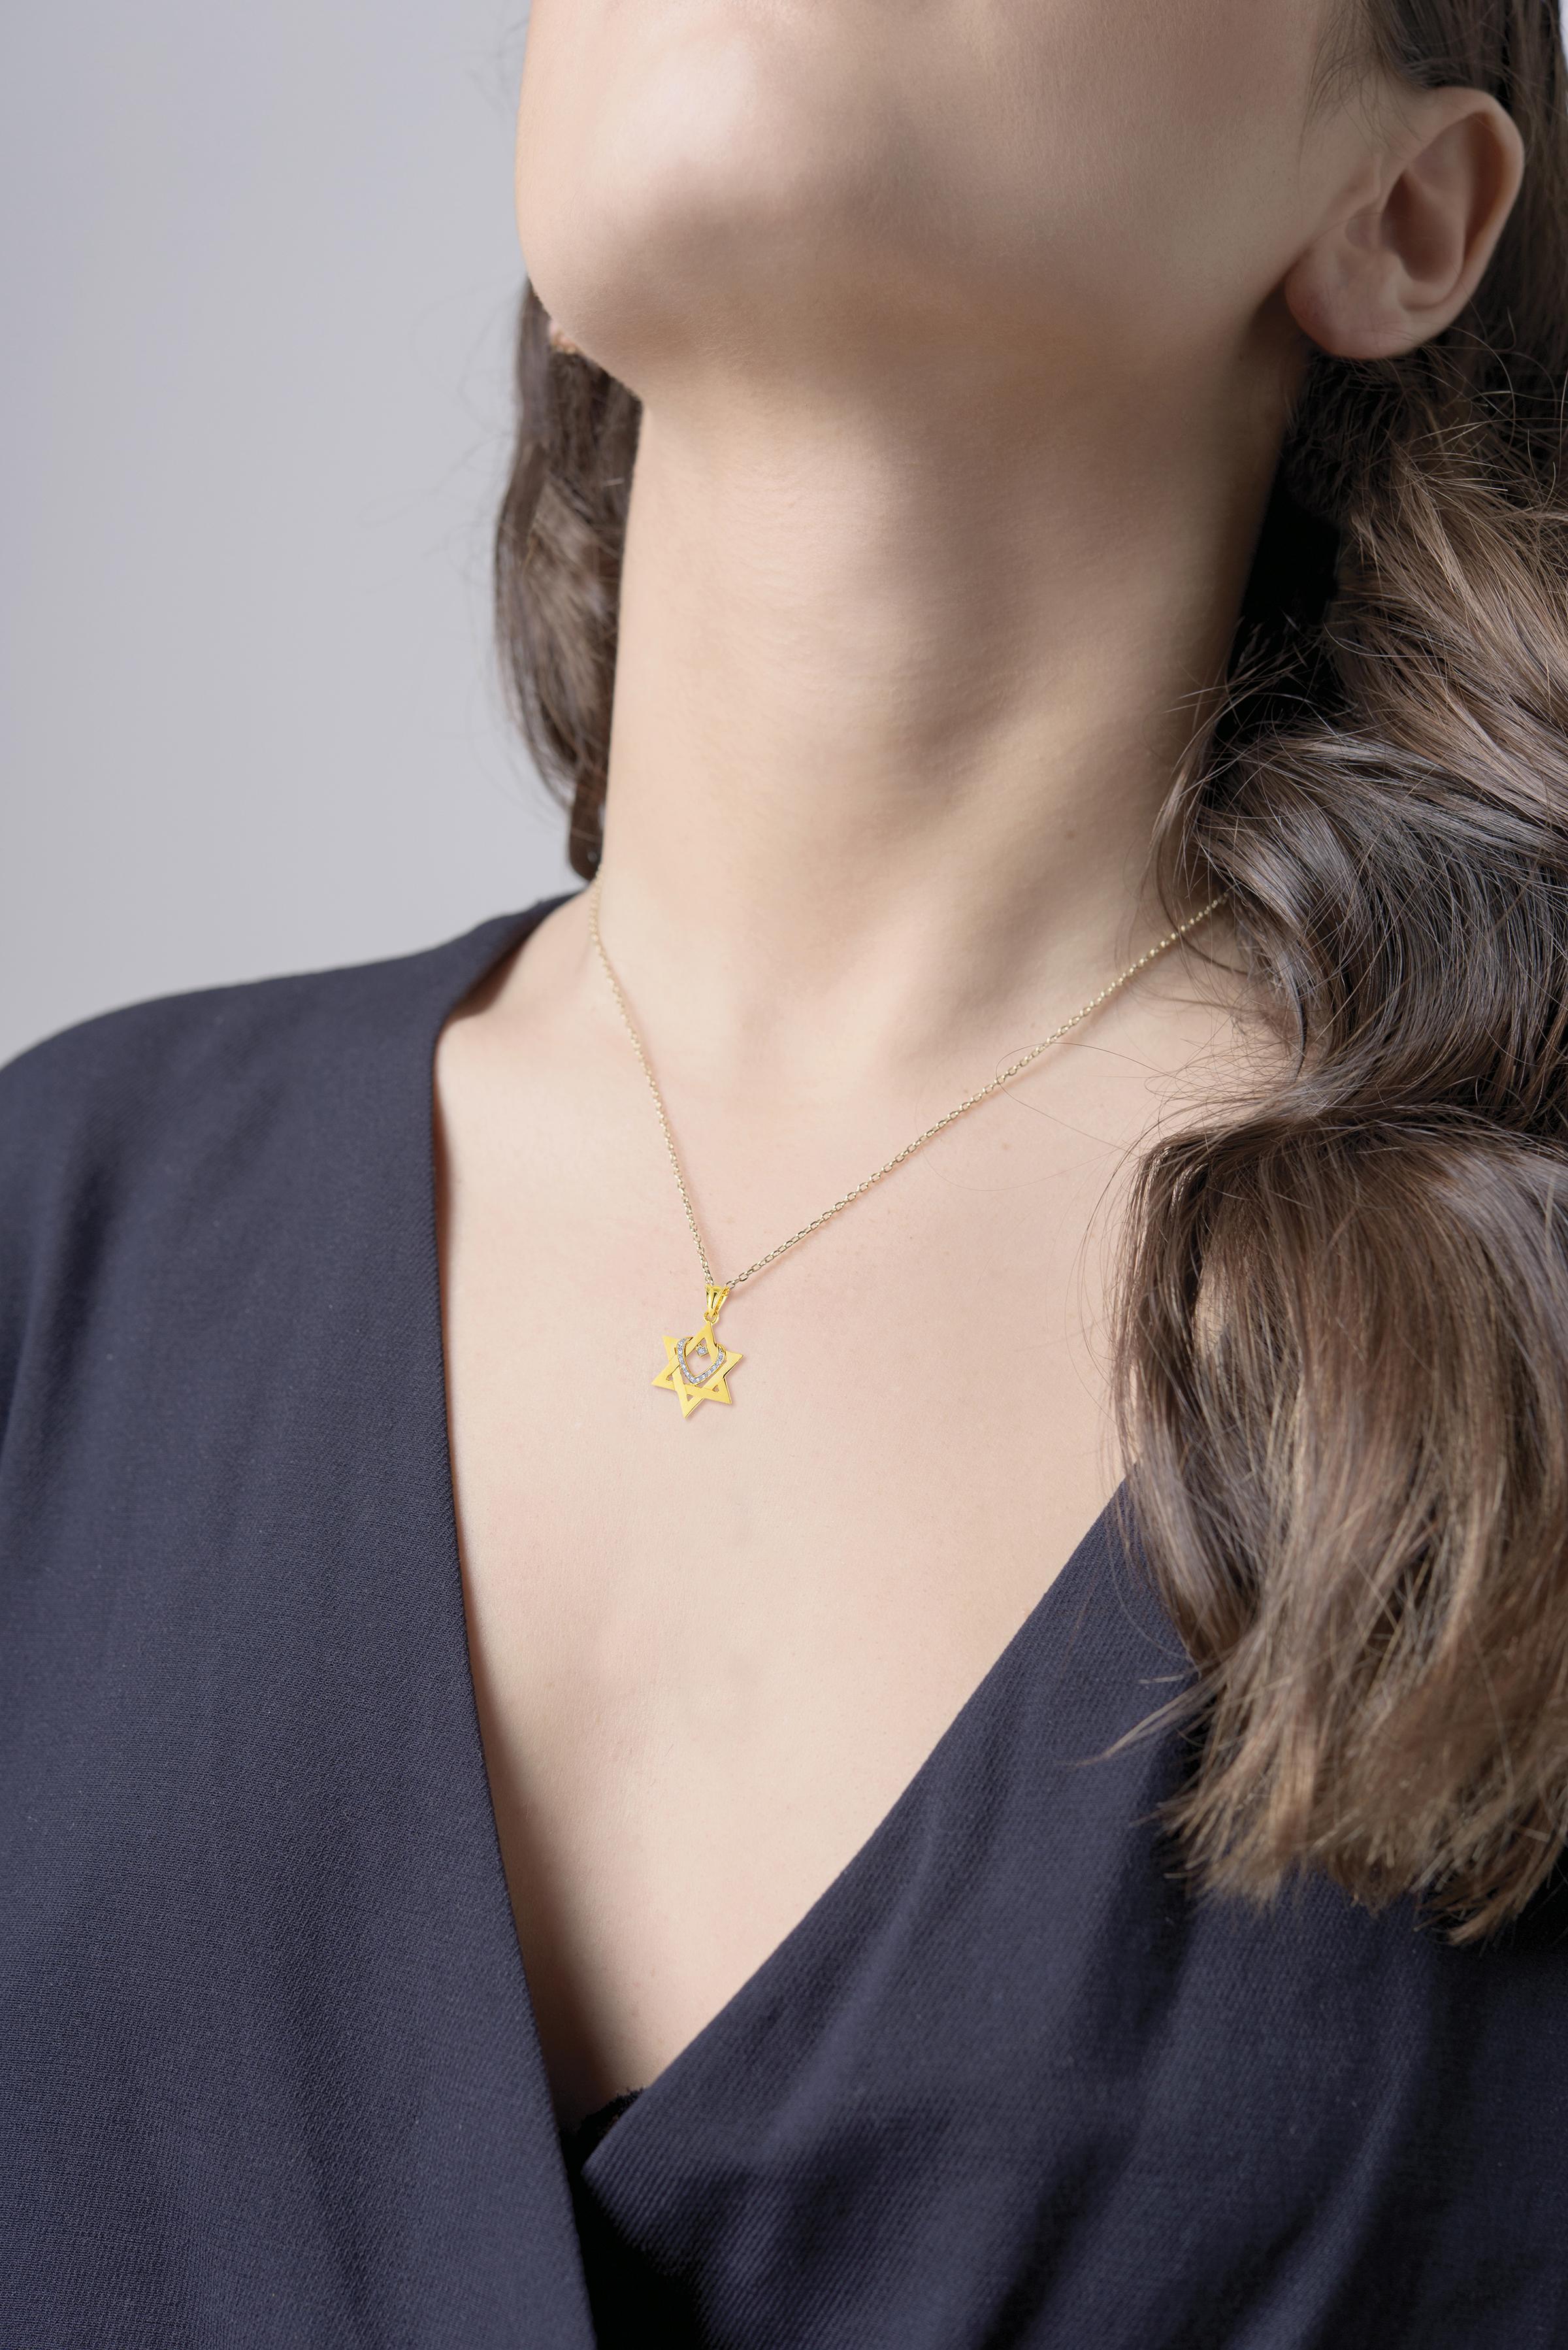 14 Karat Yellow Gold Hand-Crafted Polish-Finished 19mm Star of David Pendant, Draped with 0.07 Carats of a Pave Set Diamond Heart, and Sliding on a 16